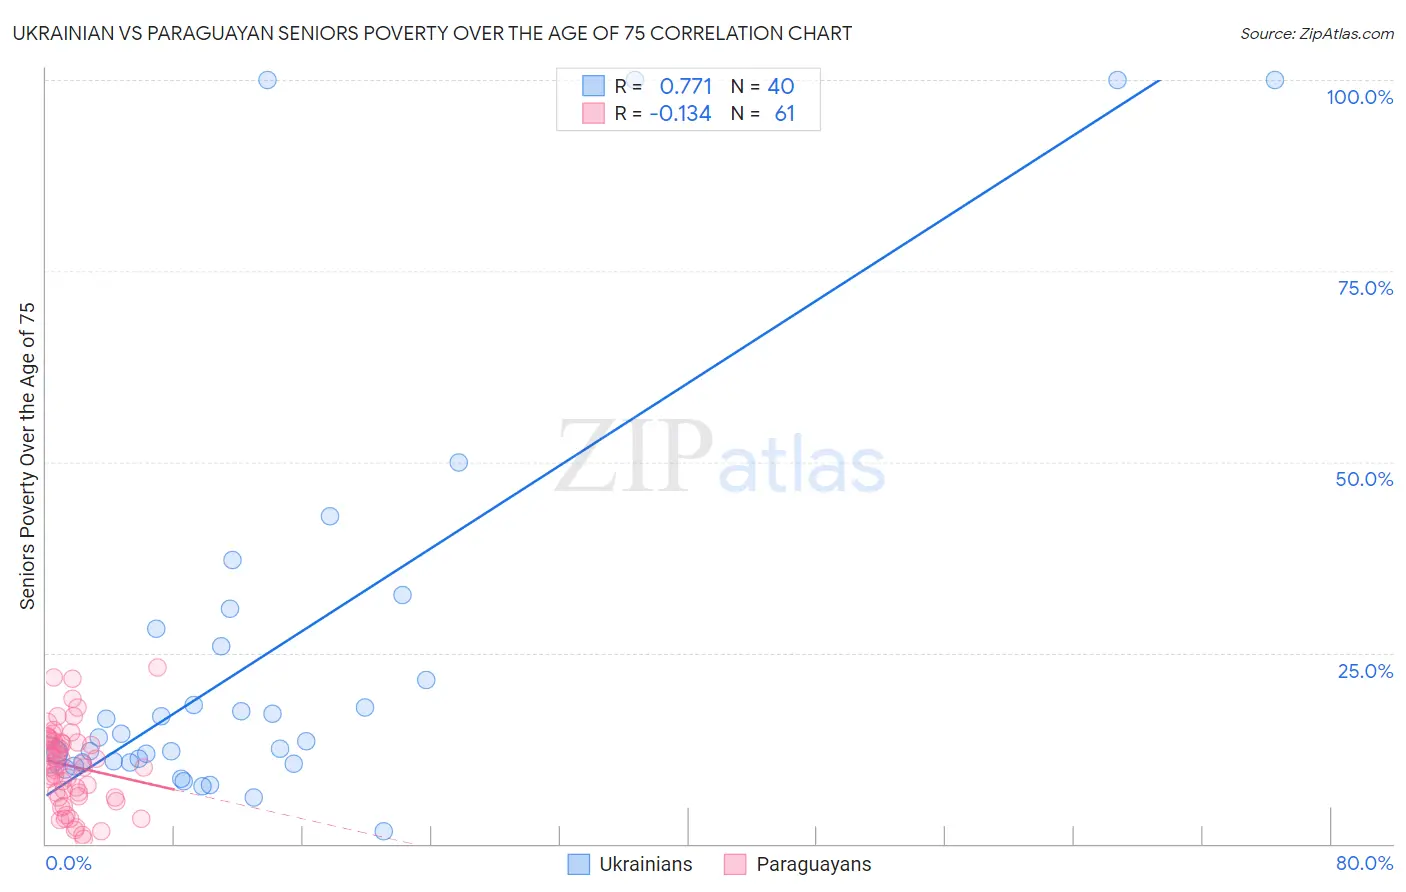 Ukrainian vs Paraguayan Seniors Poverty Over the Age of 75